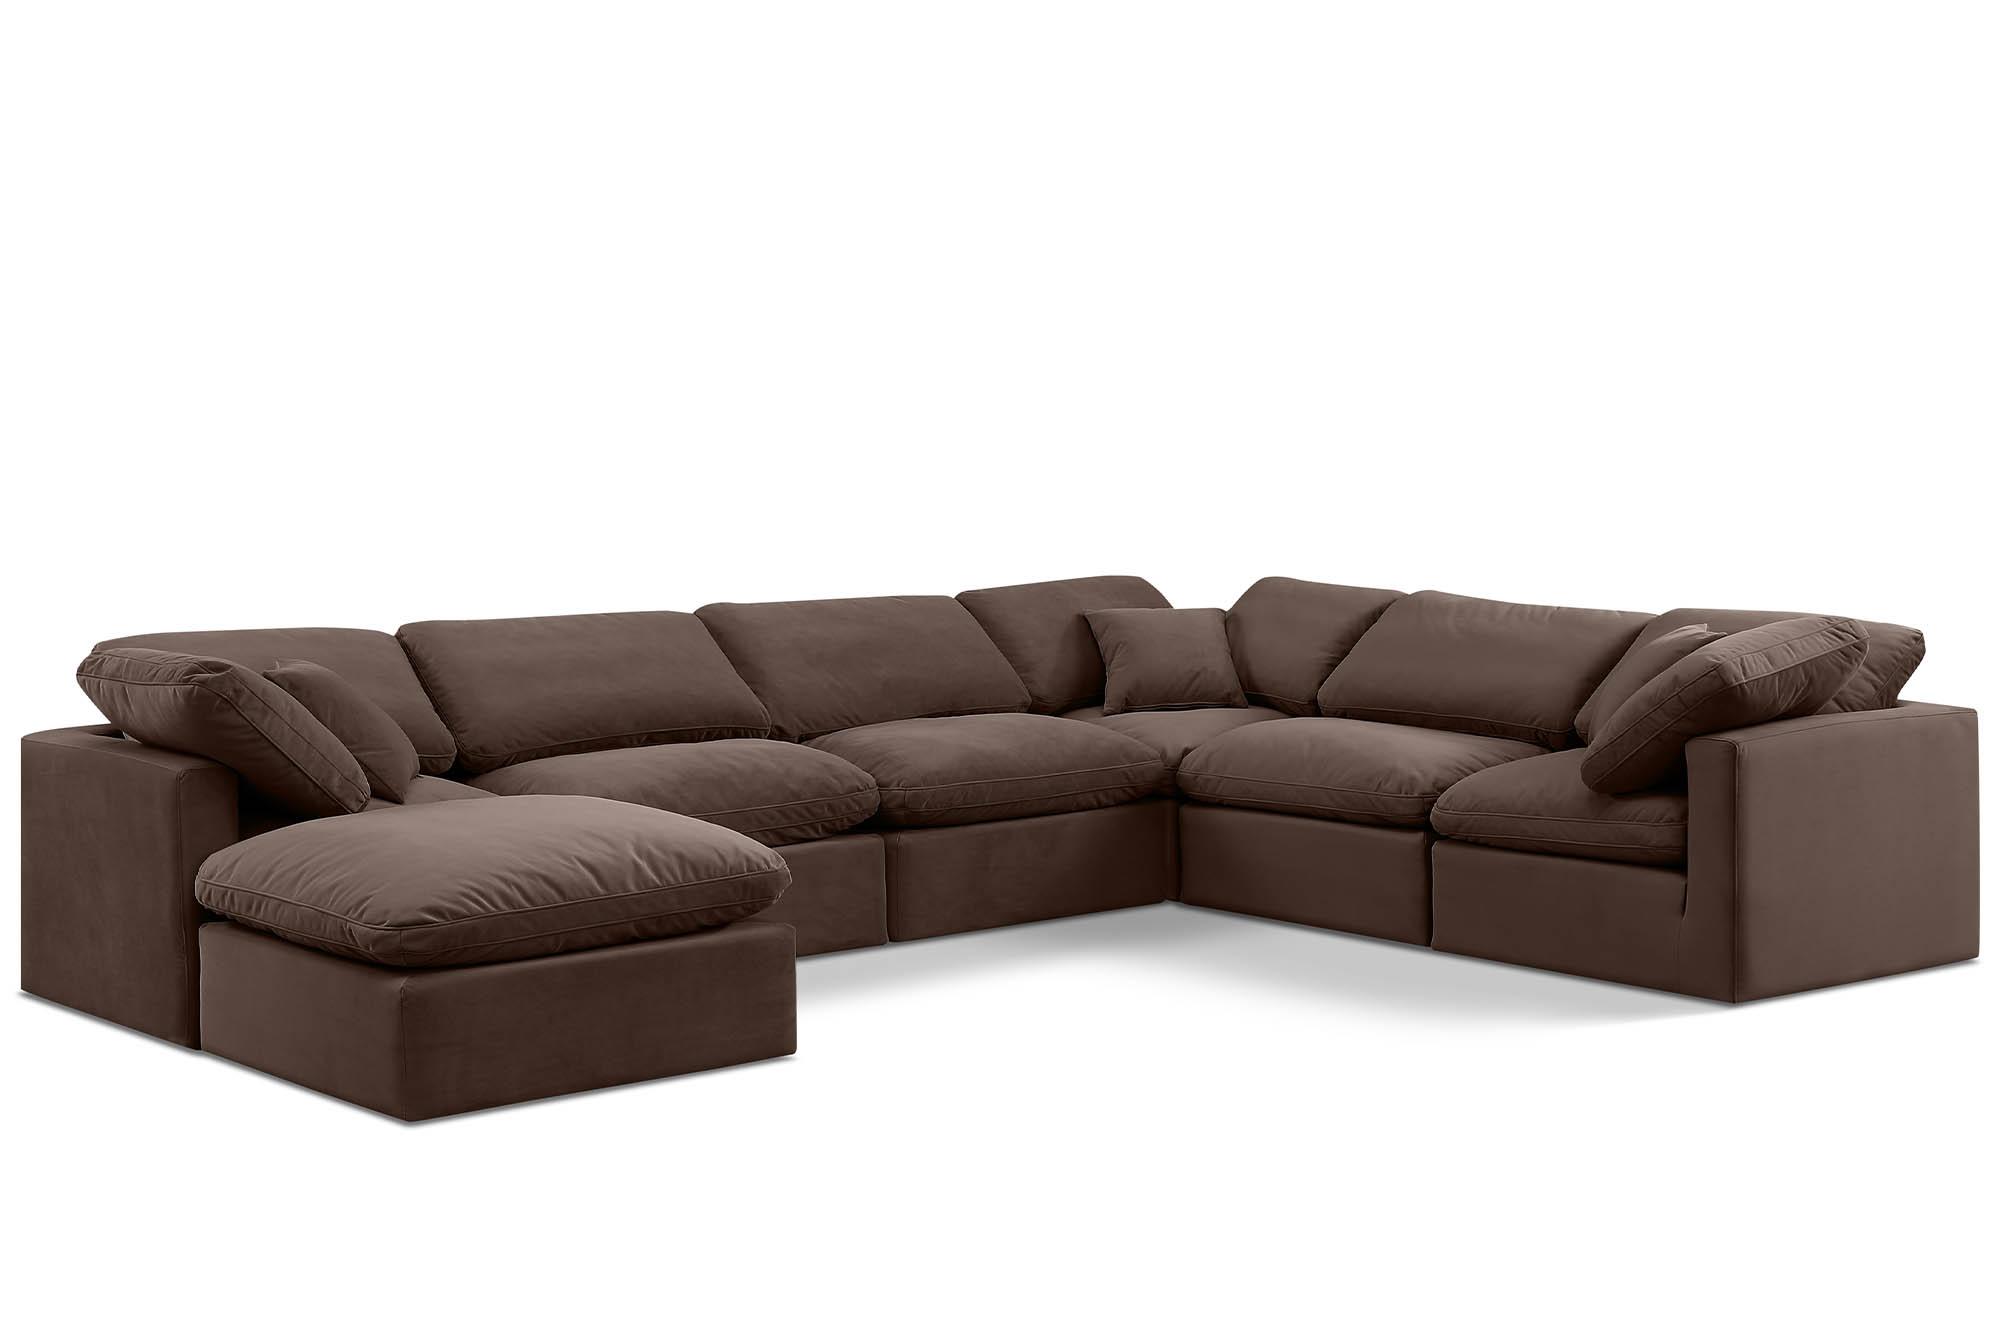 Contemporary, Modern Modular Sectional Sofa INDULGE 147Brown-Sec7A 147Brown-Sec7A in Brown Velvet